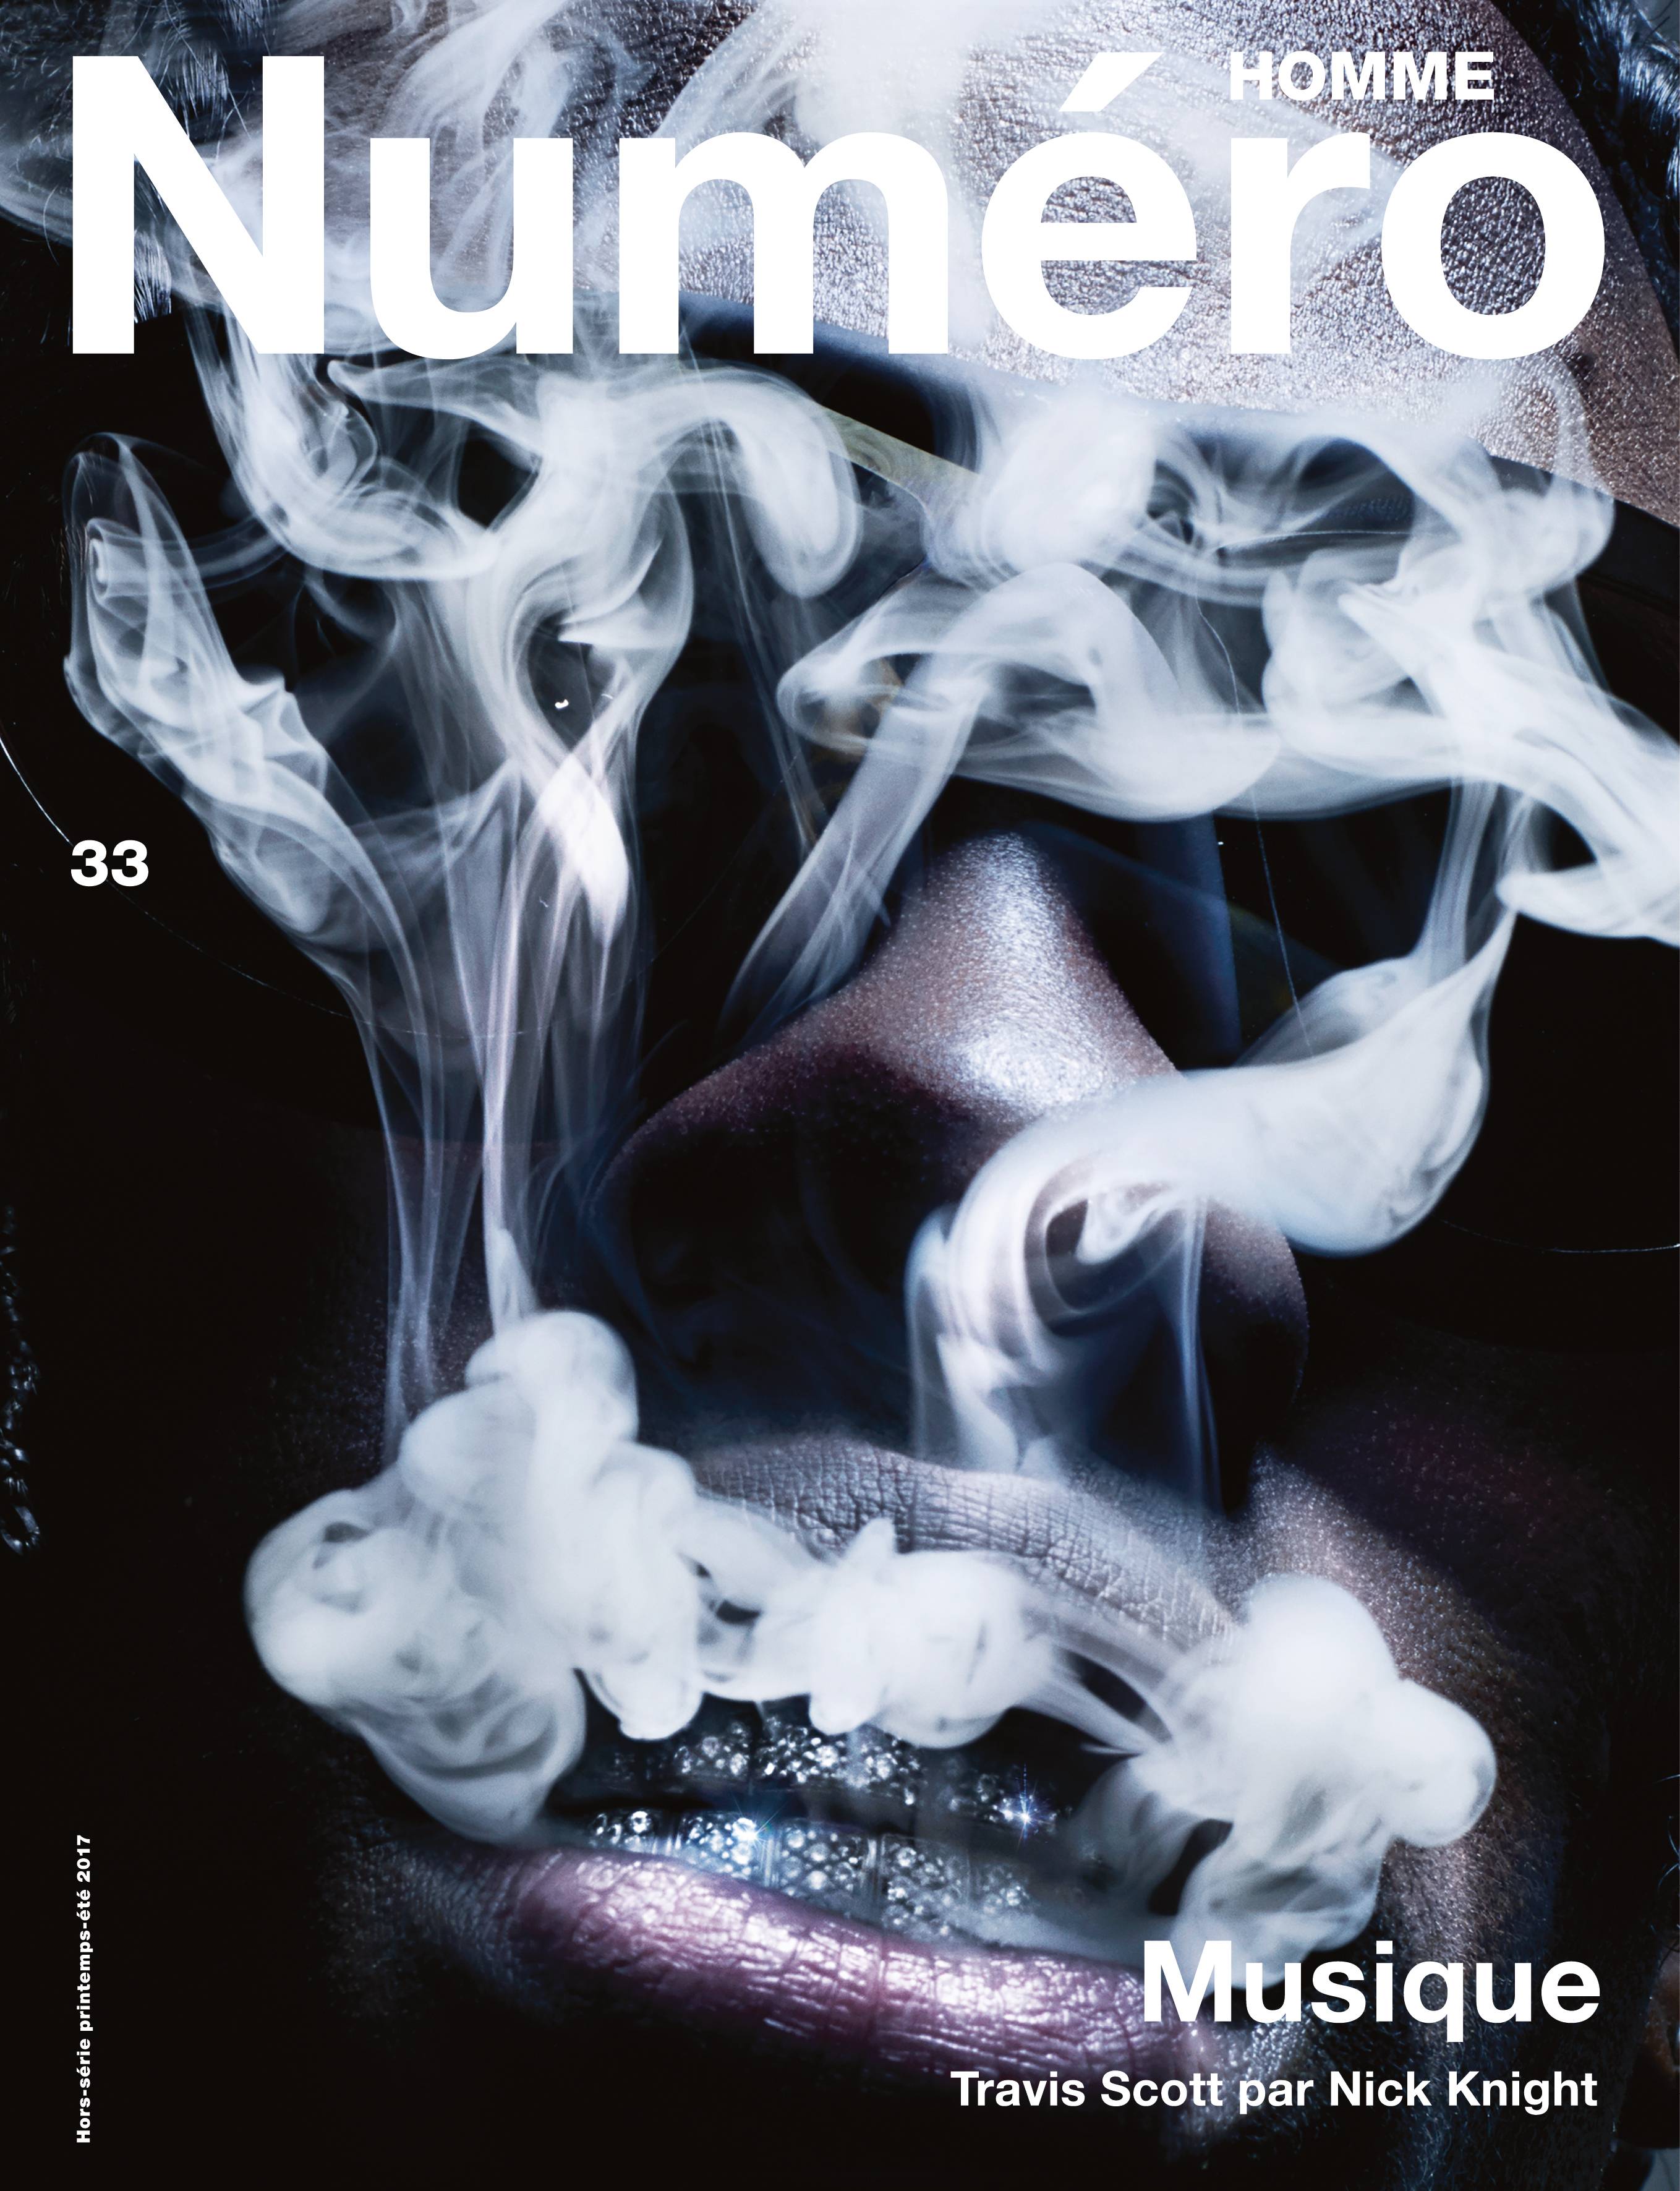 Exclusive: Travis Scott by Nick Knight on the cover of Numero Homme Musique